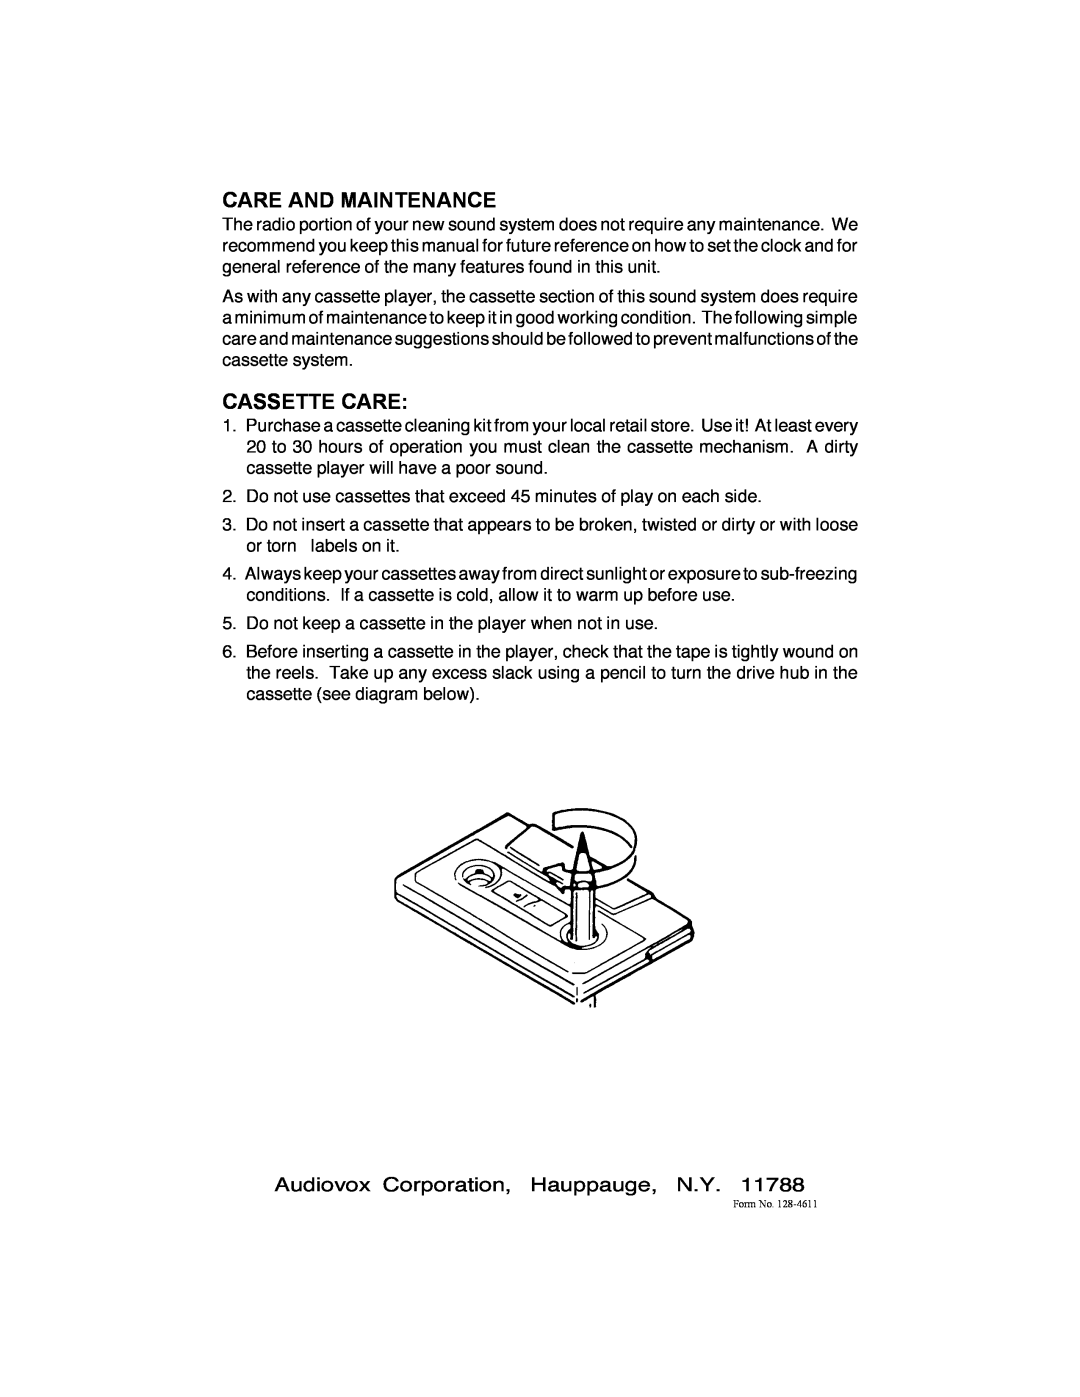 Audiovox IM-500 owner manual Audiovox Corporation, Hauppauge, N.Y, Care And Maintenance, Cassette Care 